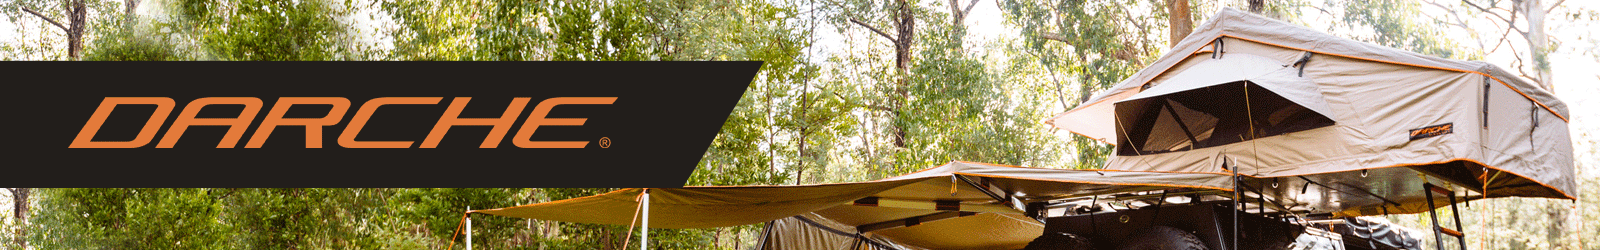 Darche - Australian Roof Tents, Awnings and Camping Equipment